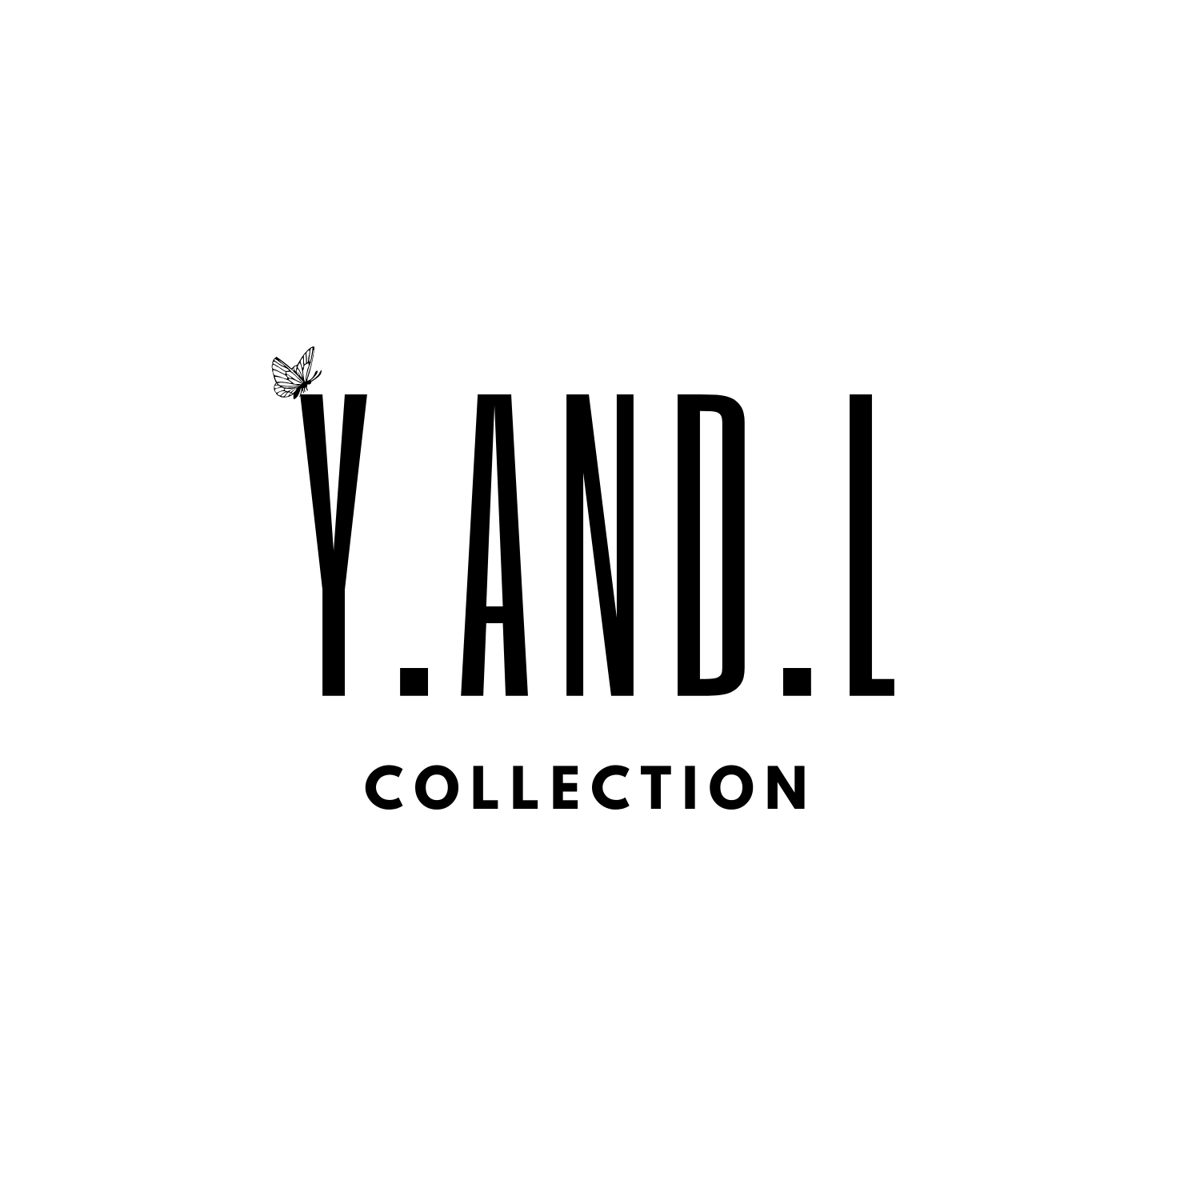 Collection y